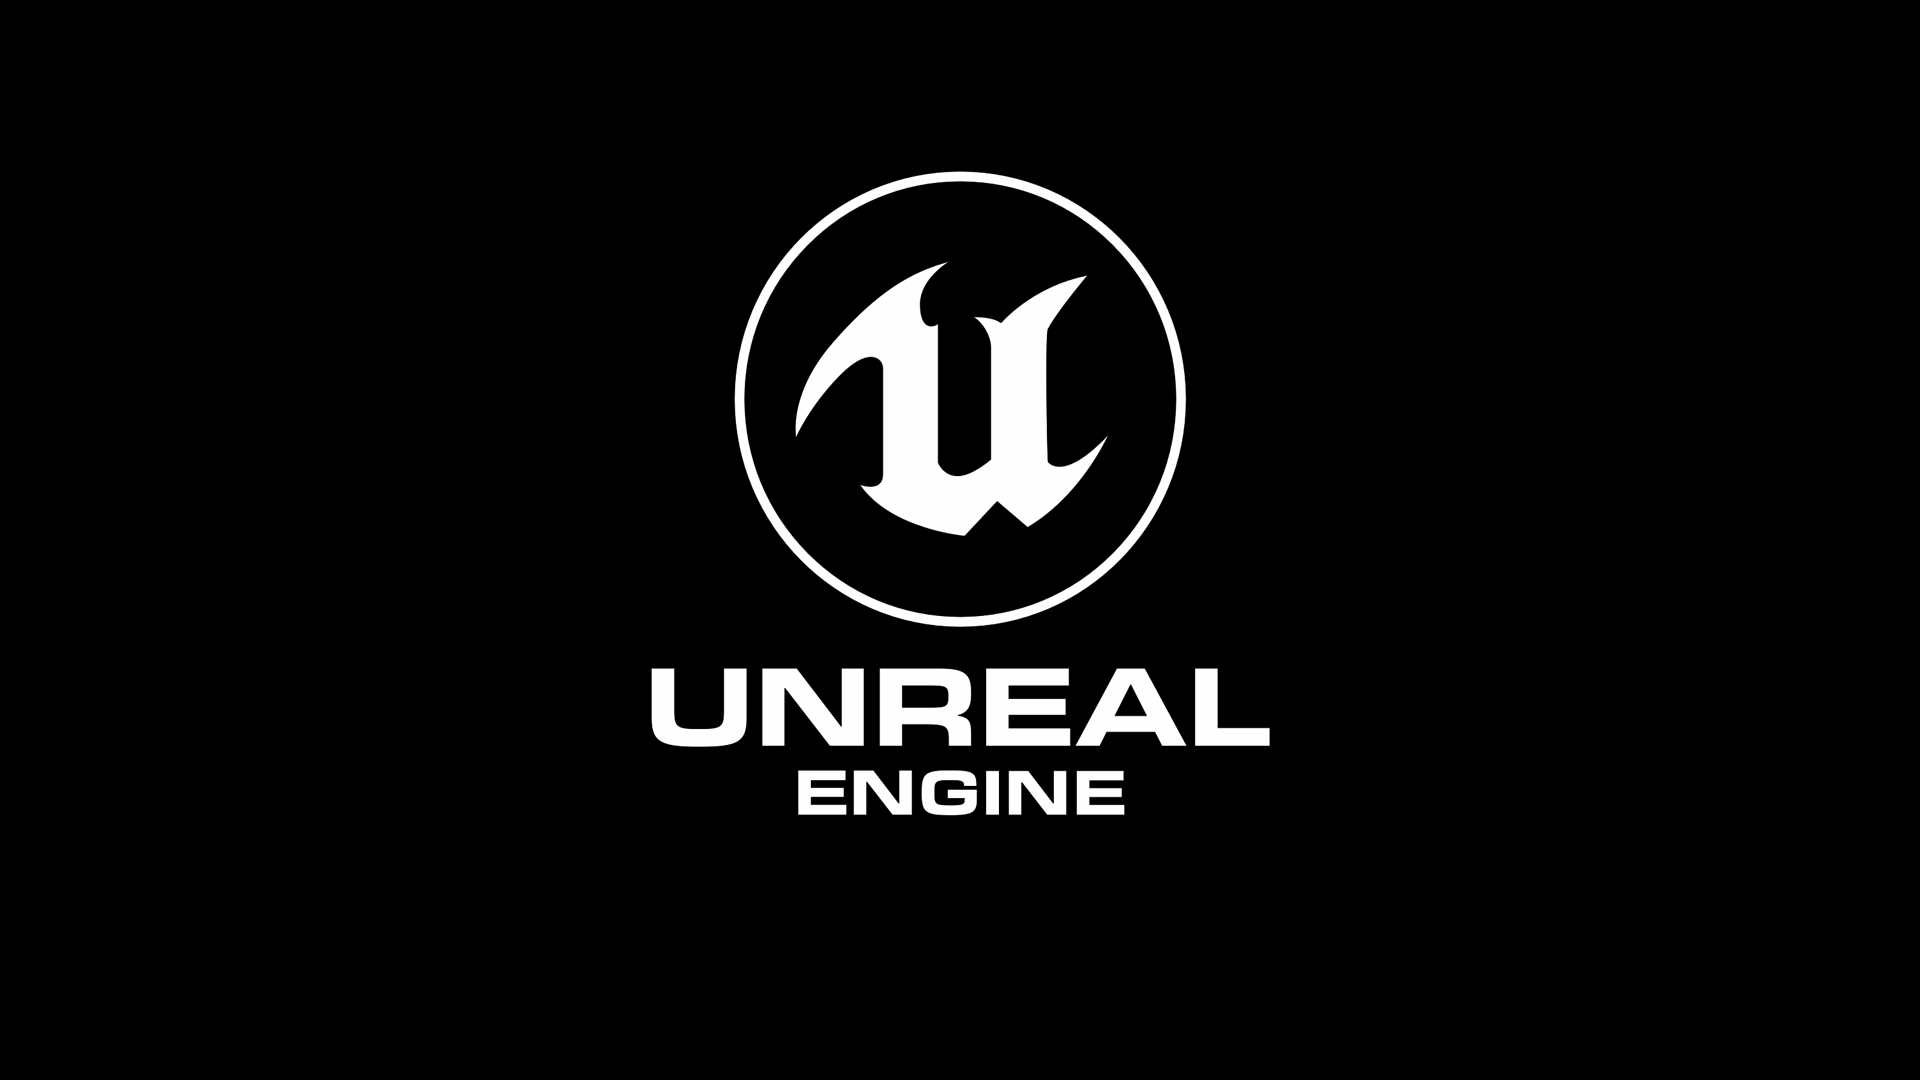 Unreal Engine is Now Royalty-free for the First $1 Million in Revenue